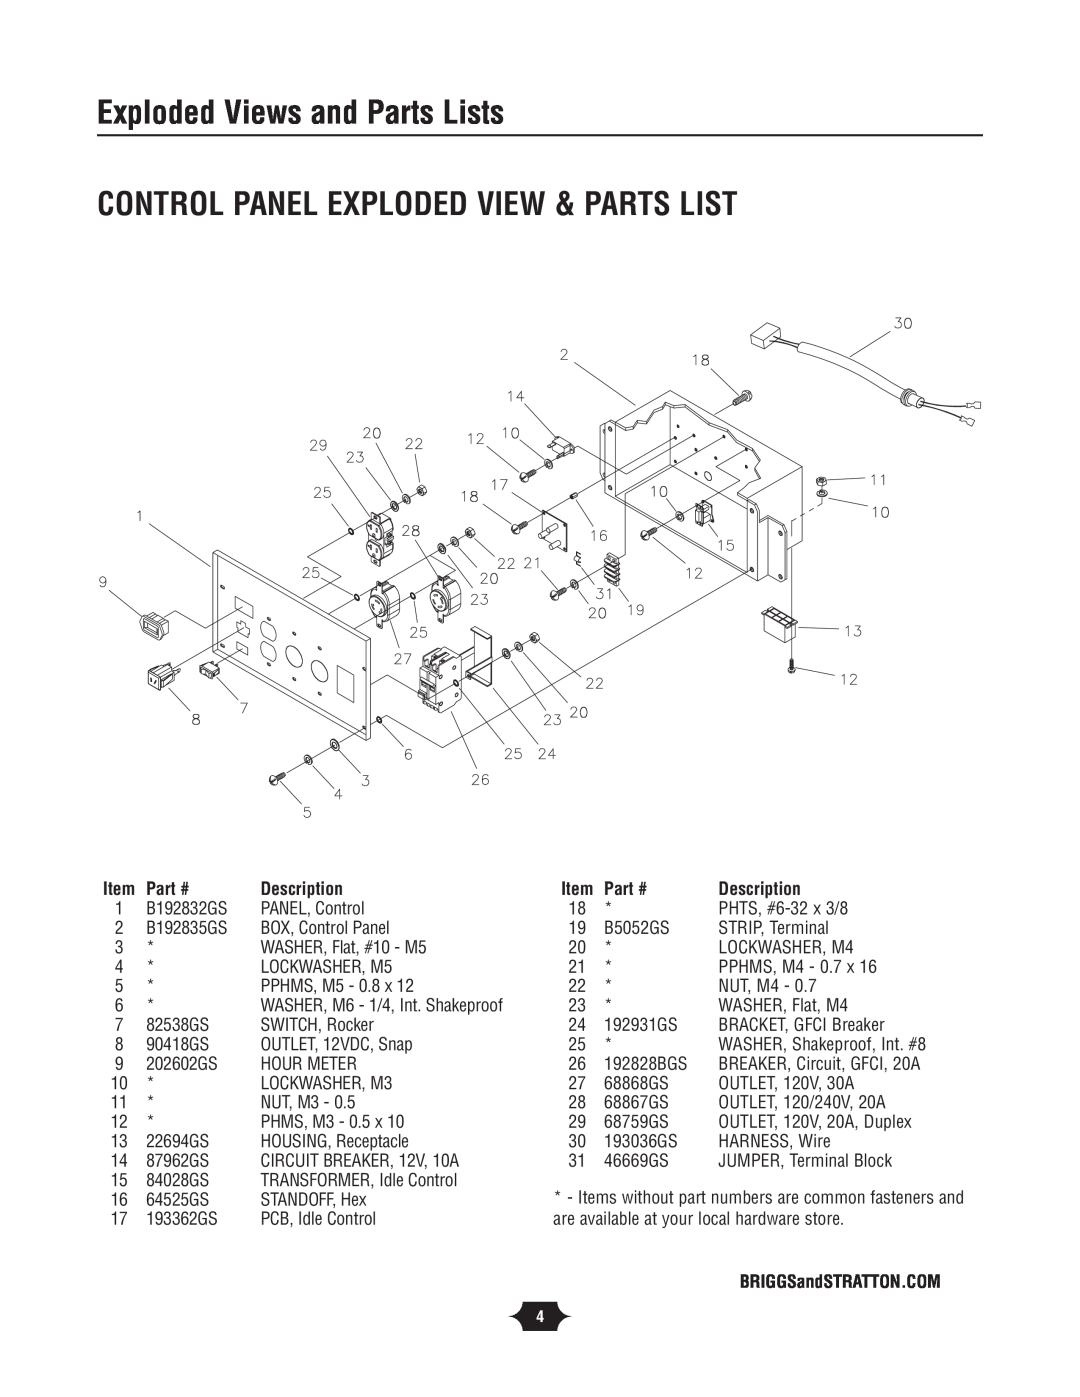 Briggs & Stratton 30342 manual Control Panel Exploded View & Parts List, Exploded Views and Parts Lists, Description 